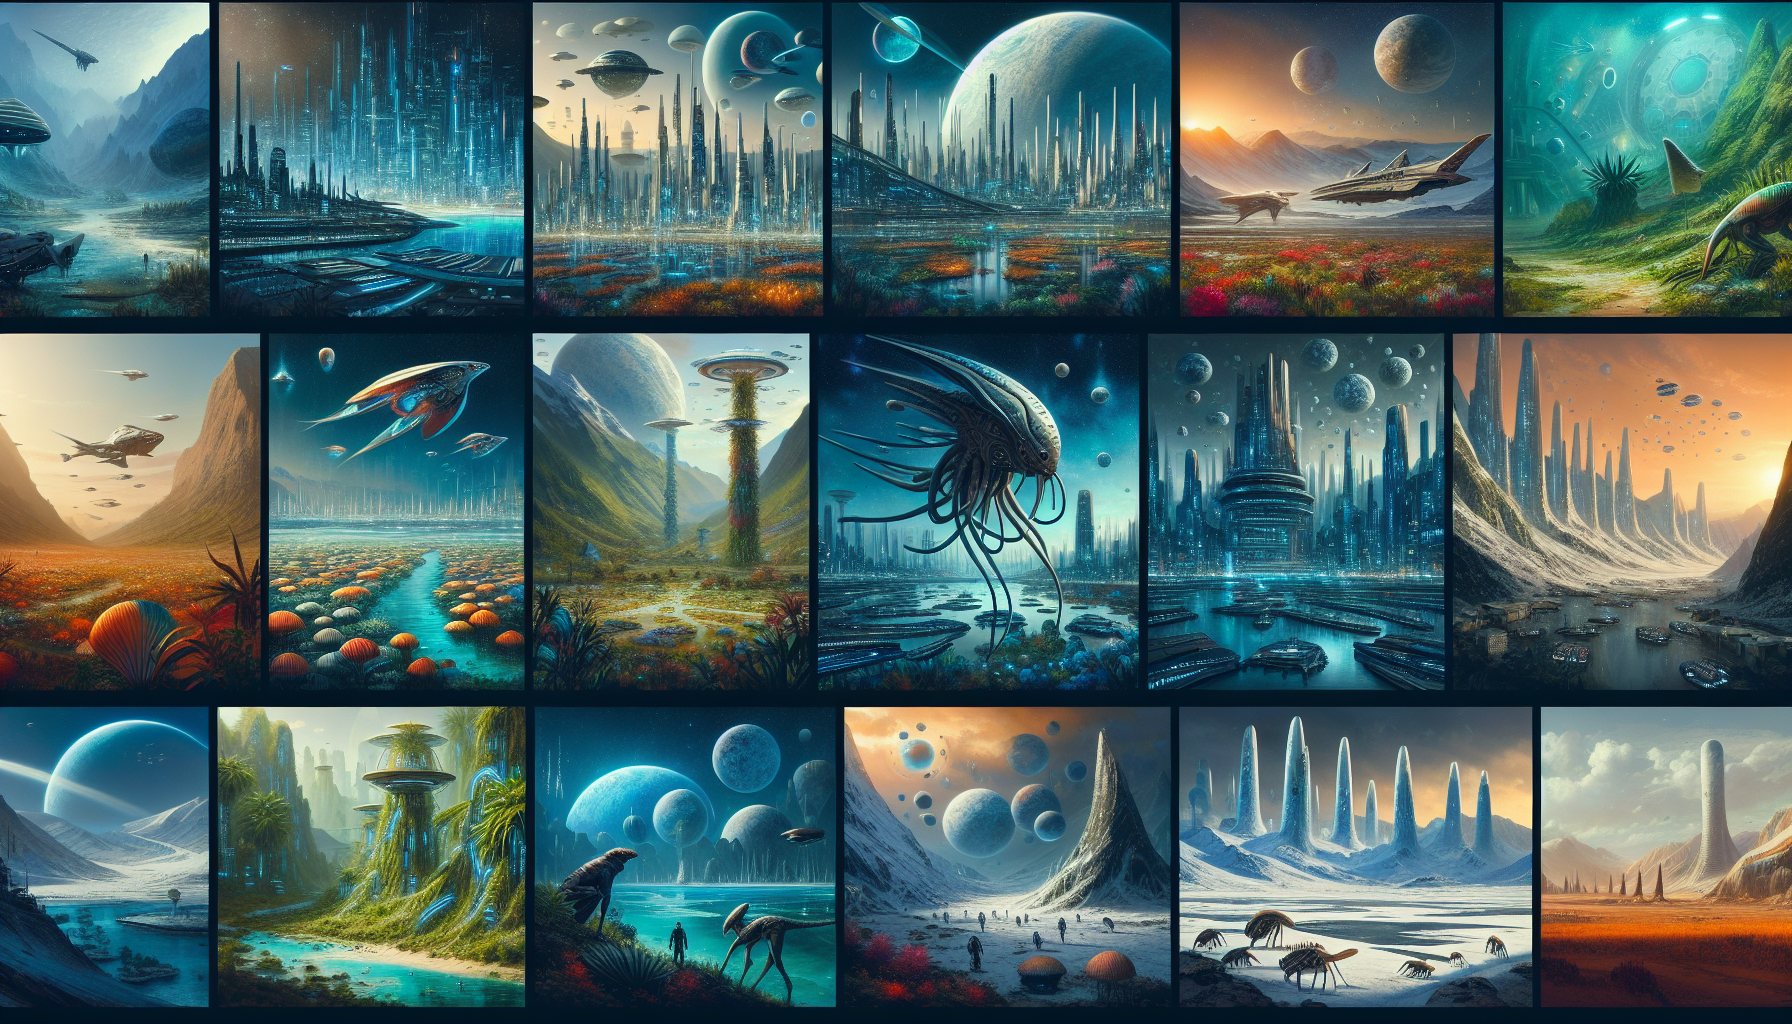 An immersive alien atlas showcasing diverse species from another galaxy and the stunning landscapes of the planets they inhabit. The style is modern and vivid, drawing inspiration from space opera themes without duplication of any specific franchise's material. Consider detailed depictions of varied technologically advanced cities, lush alien jungles, expansive desert landscapes, and ice-encrusted moons. Each scene should highlight a distinct species adapted to their environment, showcasing physical traits commonplace within their kind. Include aquatic lifeforms in massive underwater cities, aerial beings soaring in skyscraping metropolis, and terrestrial species thriving in arid deserts or polar ice caps.